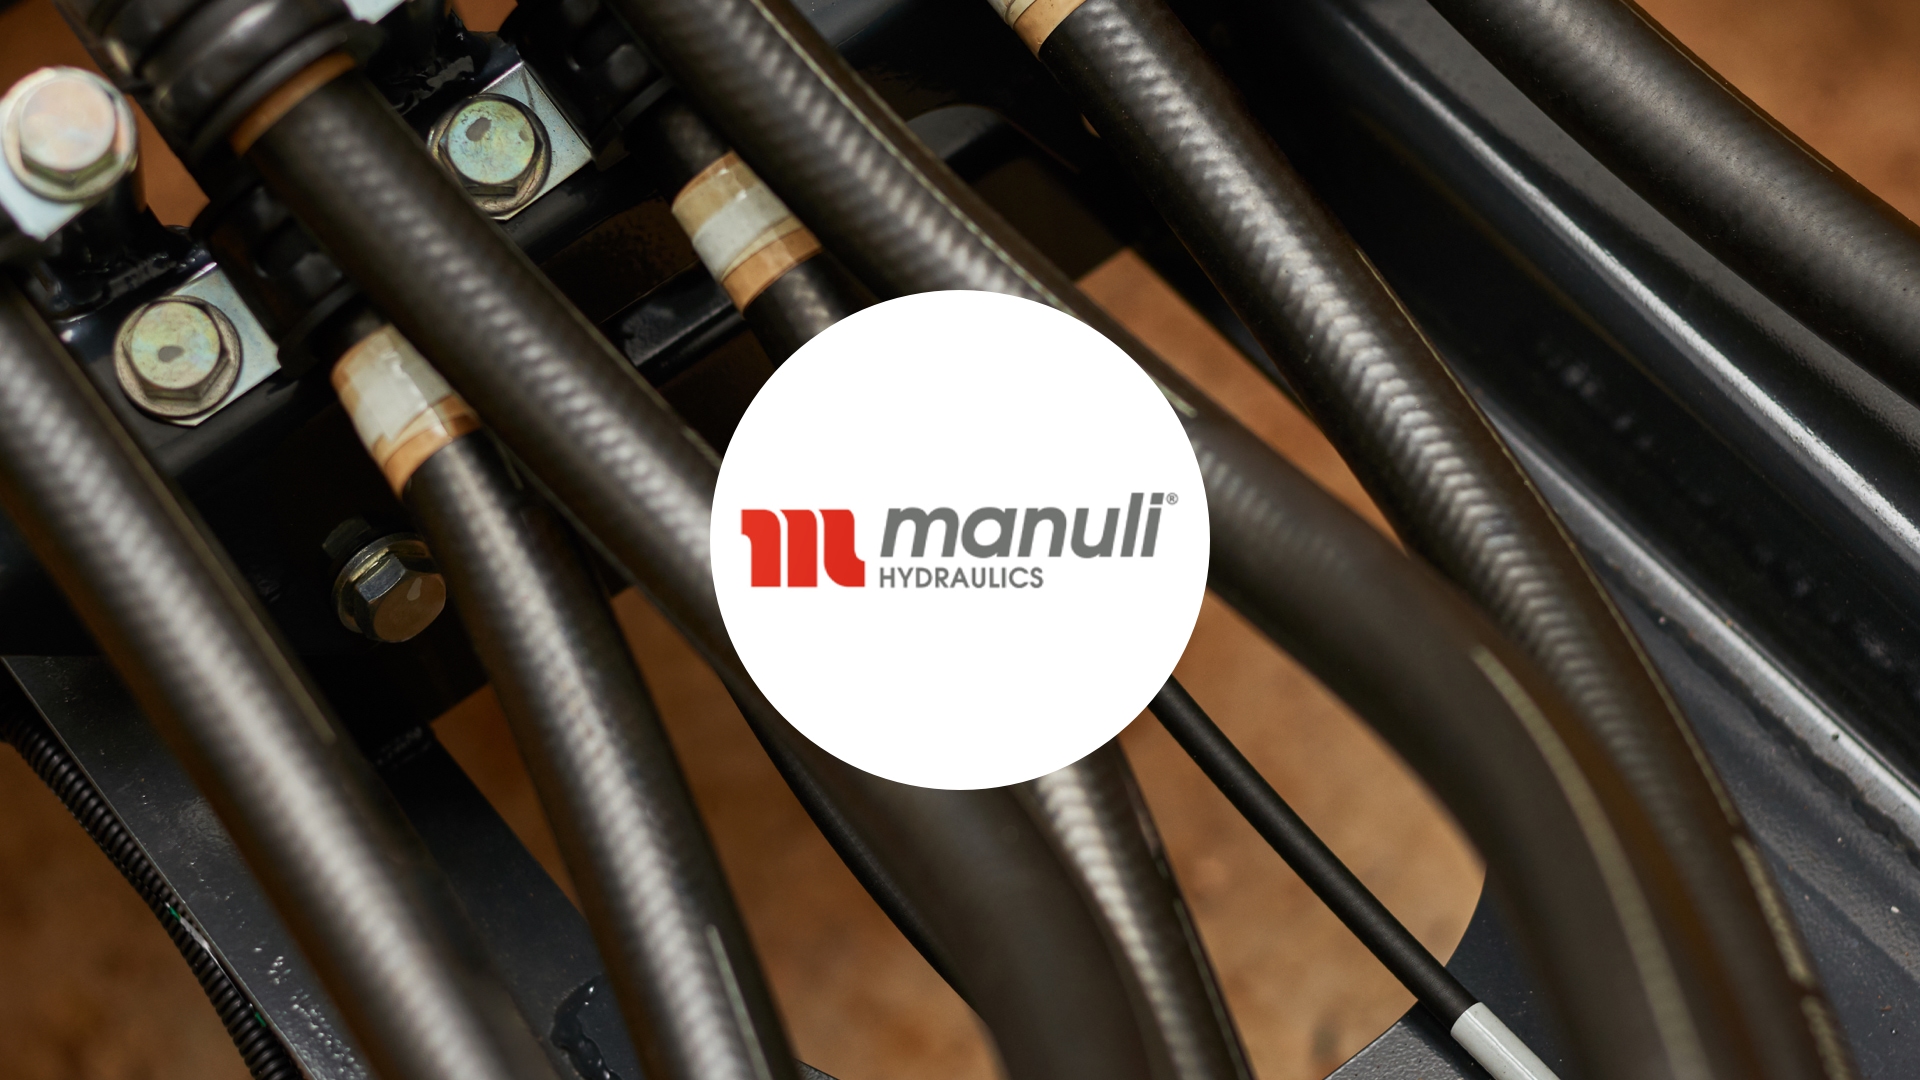 Find out more about Gemba and Manuli Hydraulics 